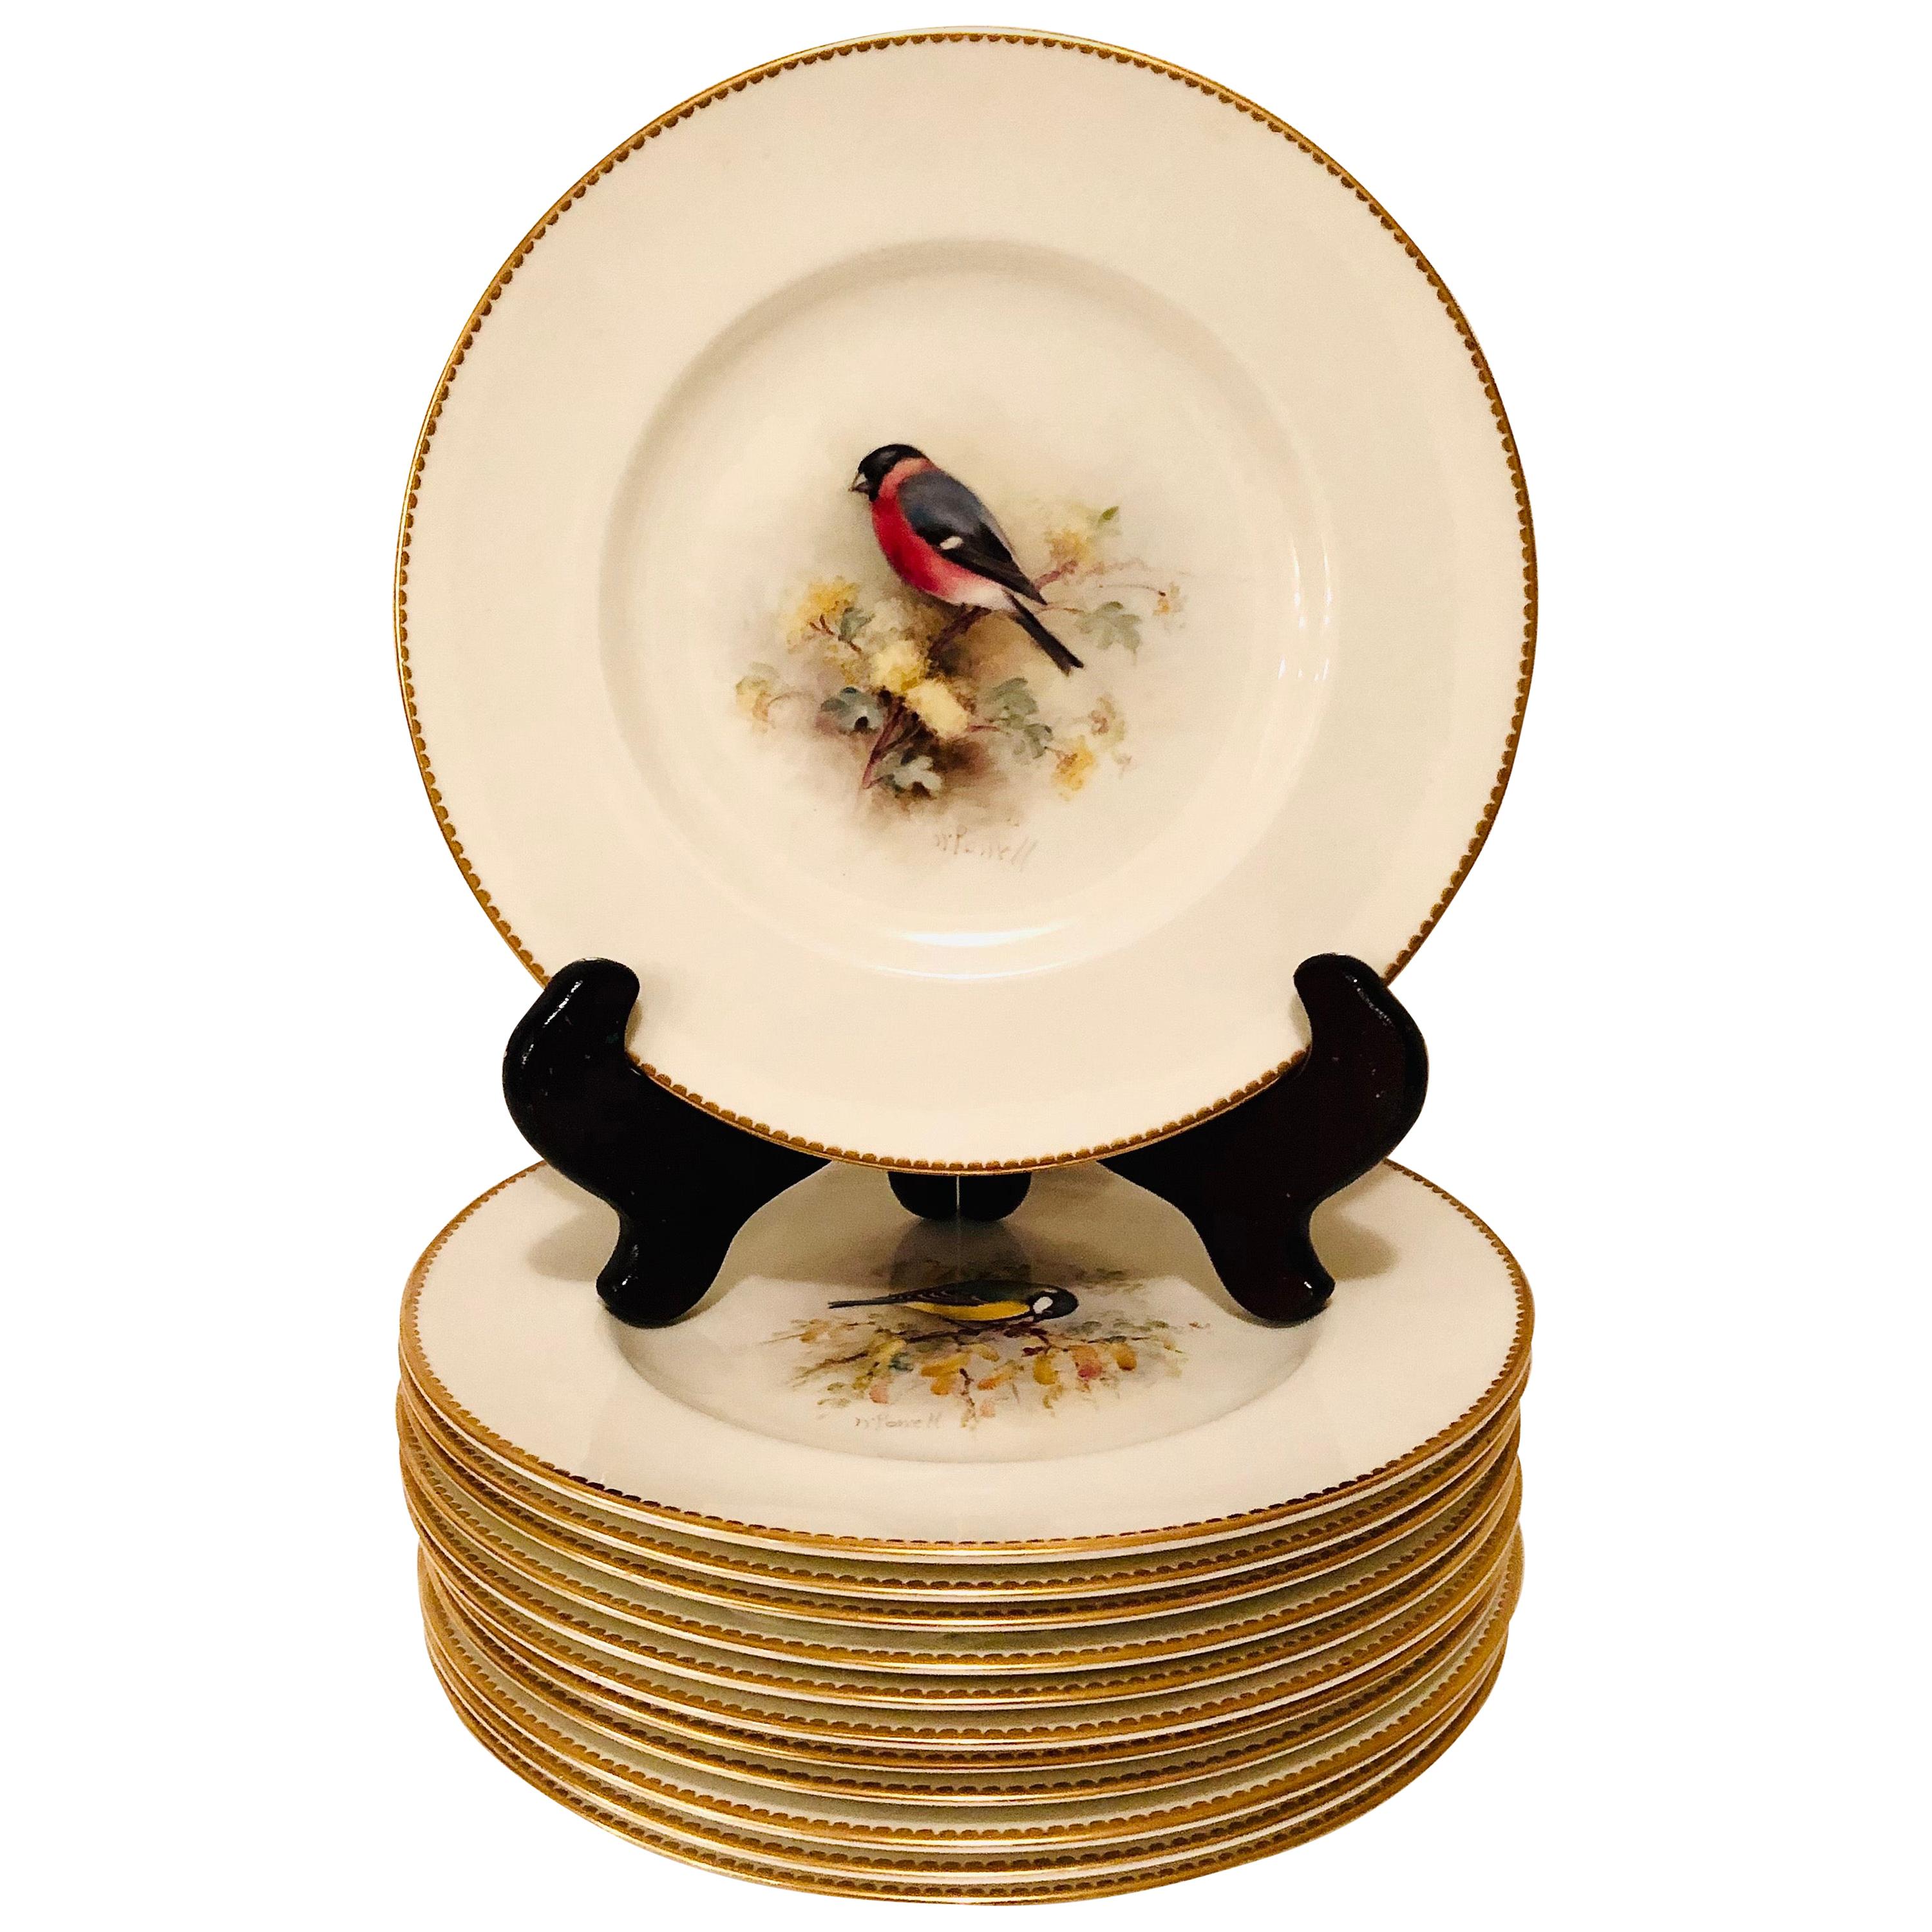 Set of 11 Royal Worcester Plates Each Hand Painted with Different Bird Paintings